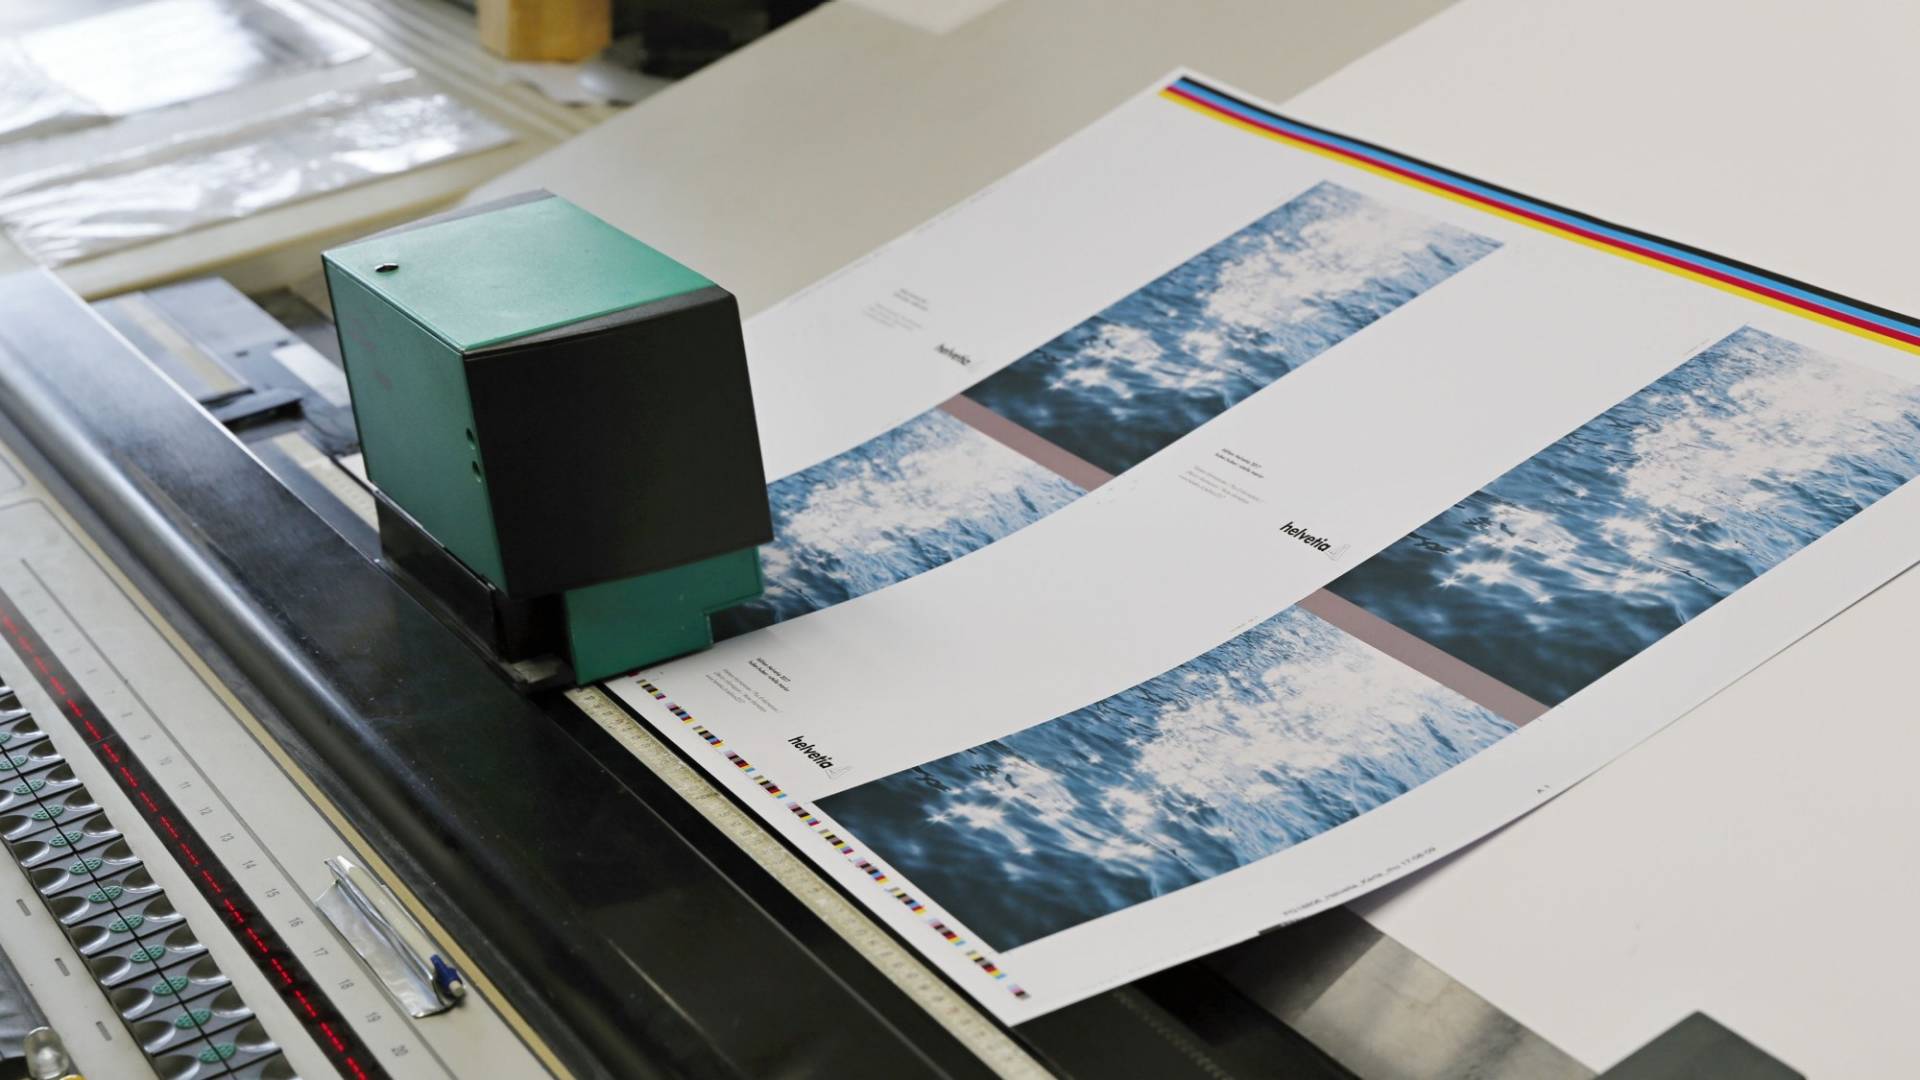 A device measuring the colour values on a printout of the artwork.